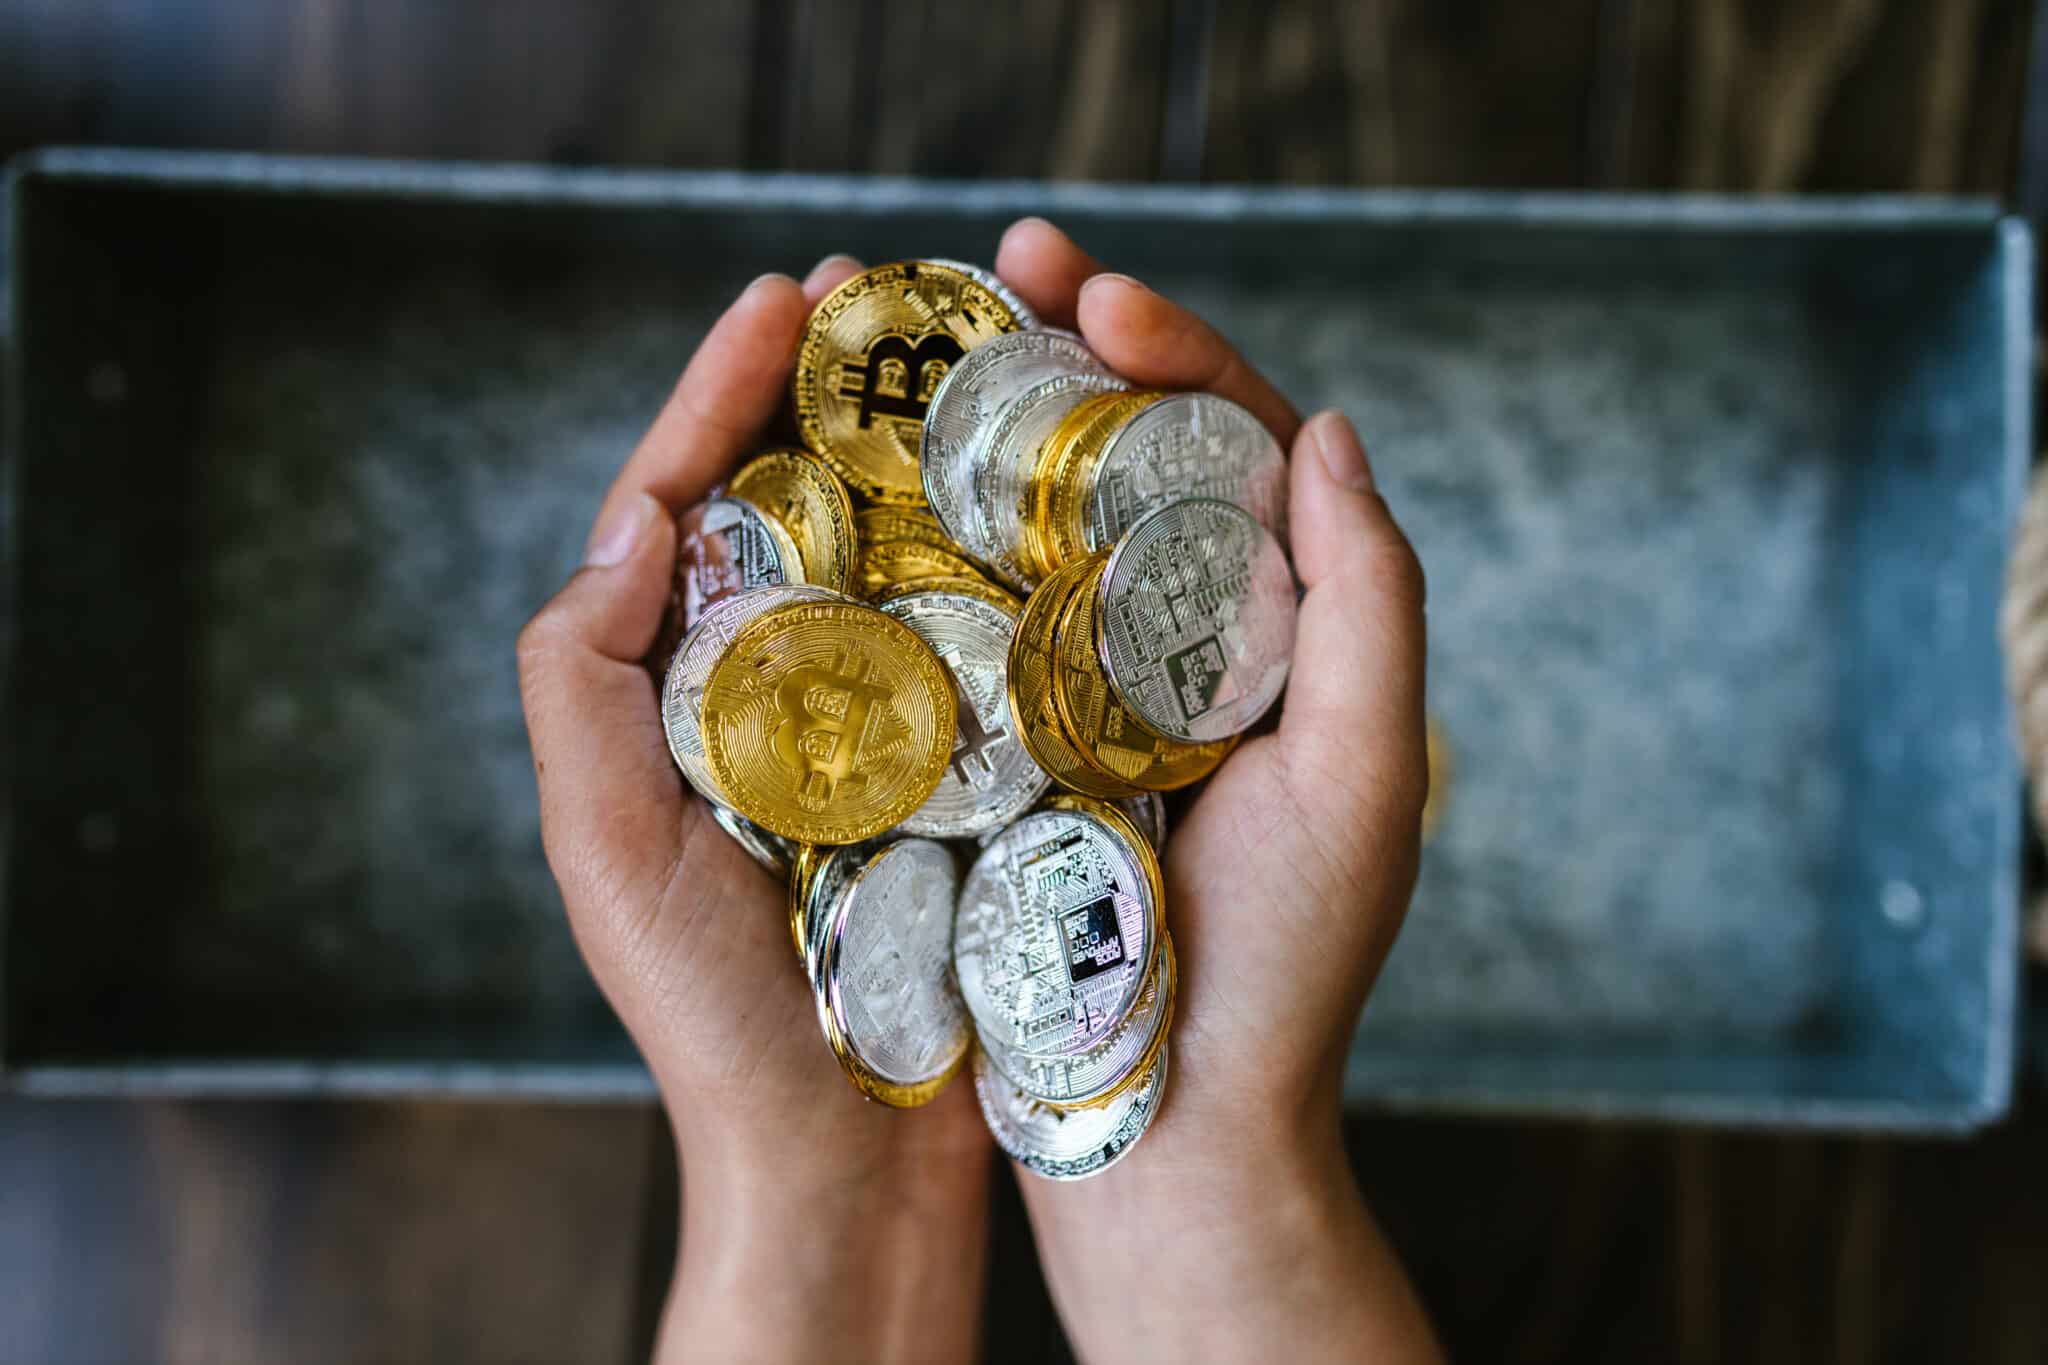 Person holding round gold and silver coins